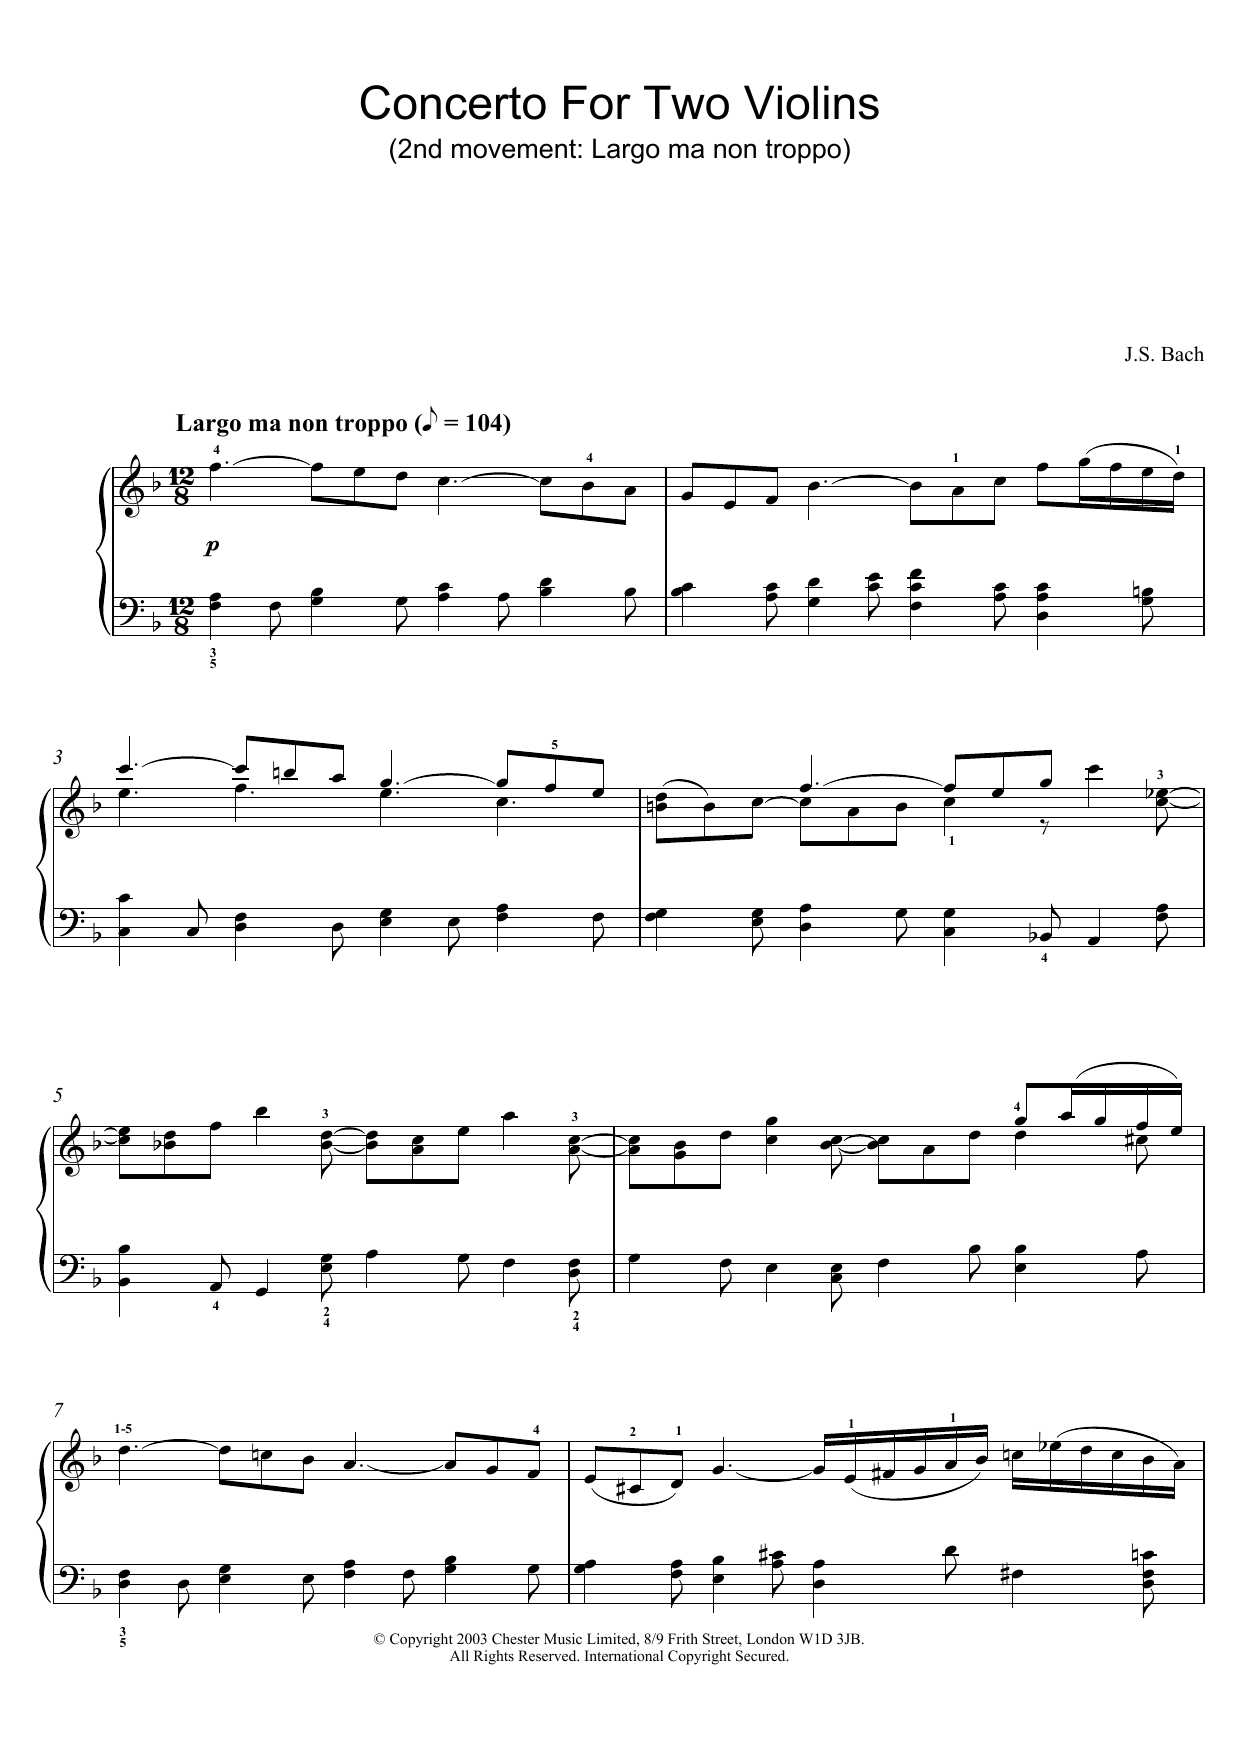 J.S. Bach Concerto For Two Violins (2nd movement: Largo ma non troppo) sheet music preview music notes and score for Piano including 3 page(s)